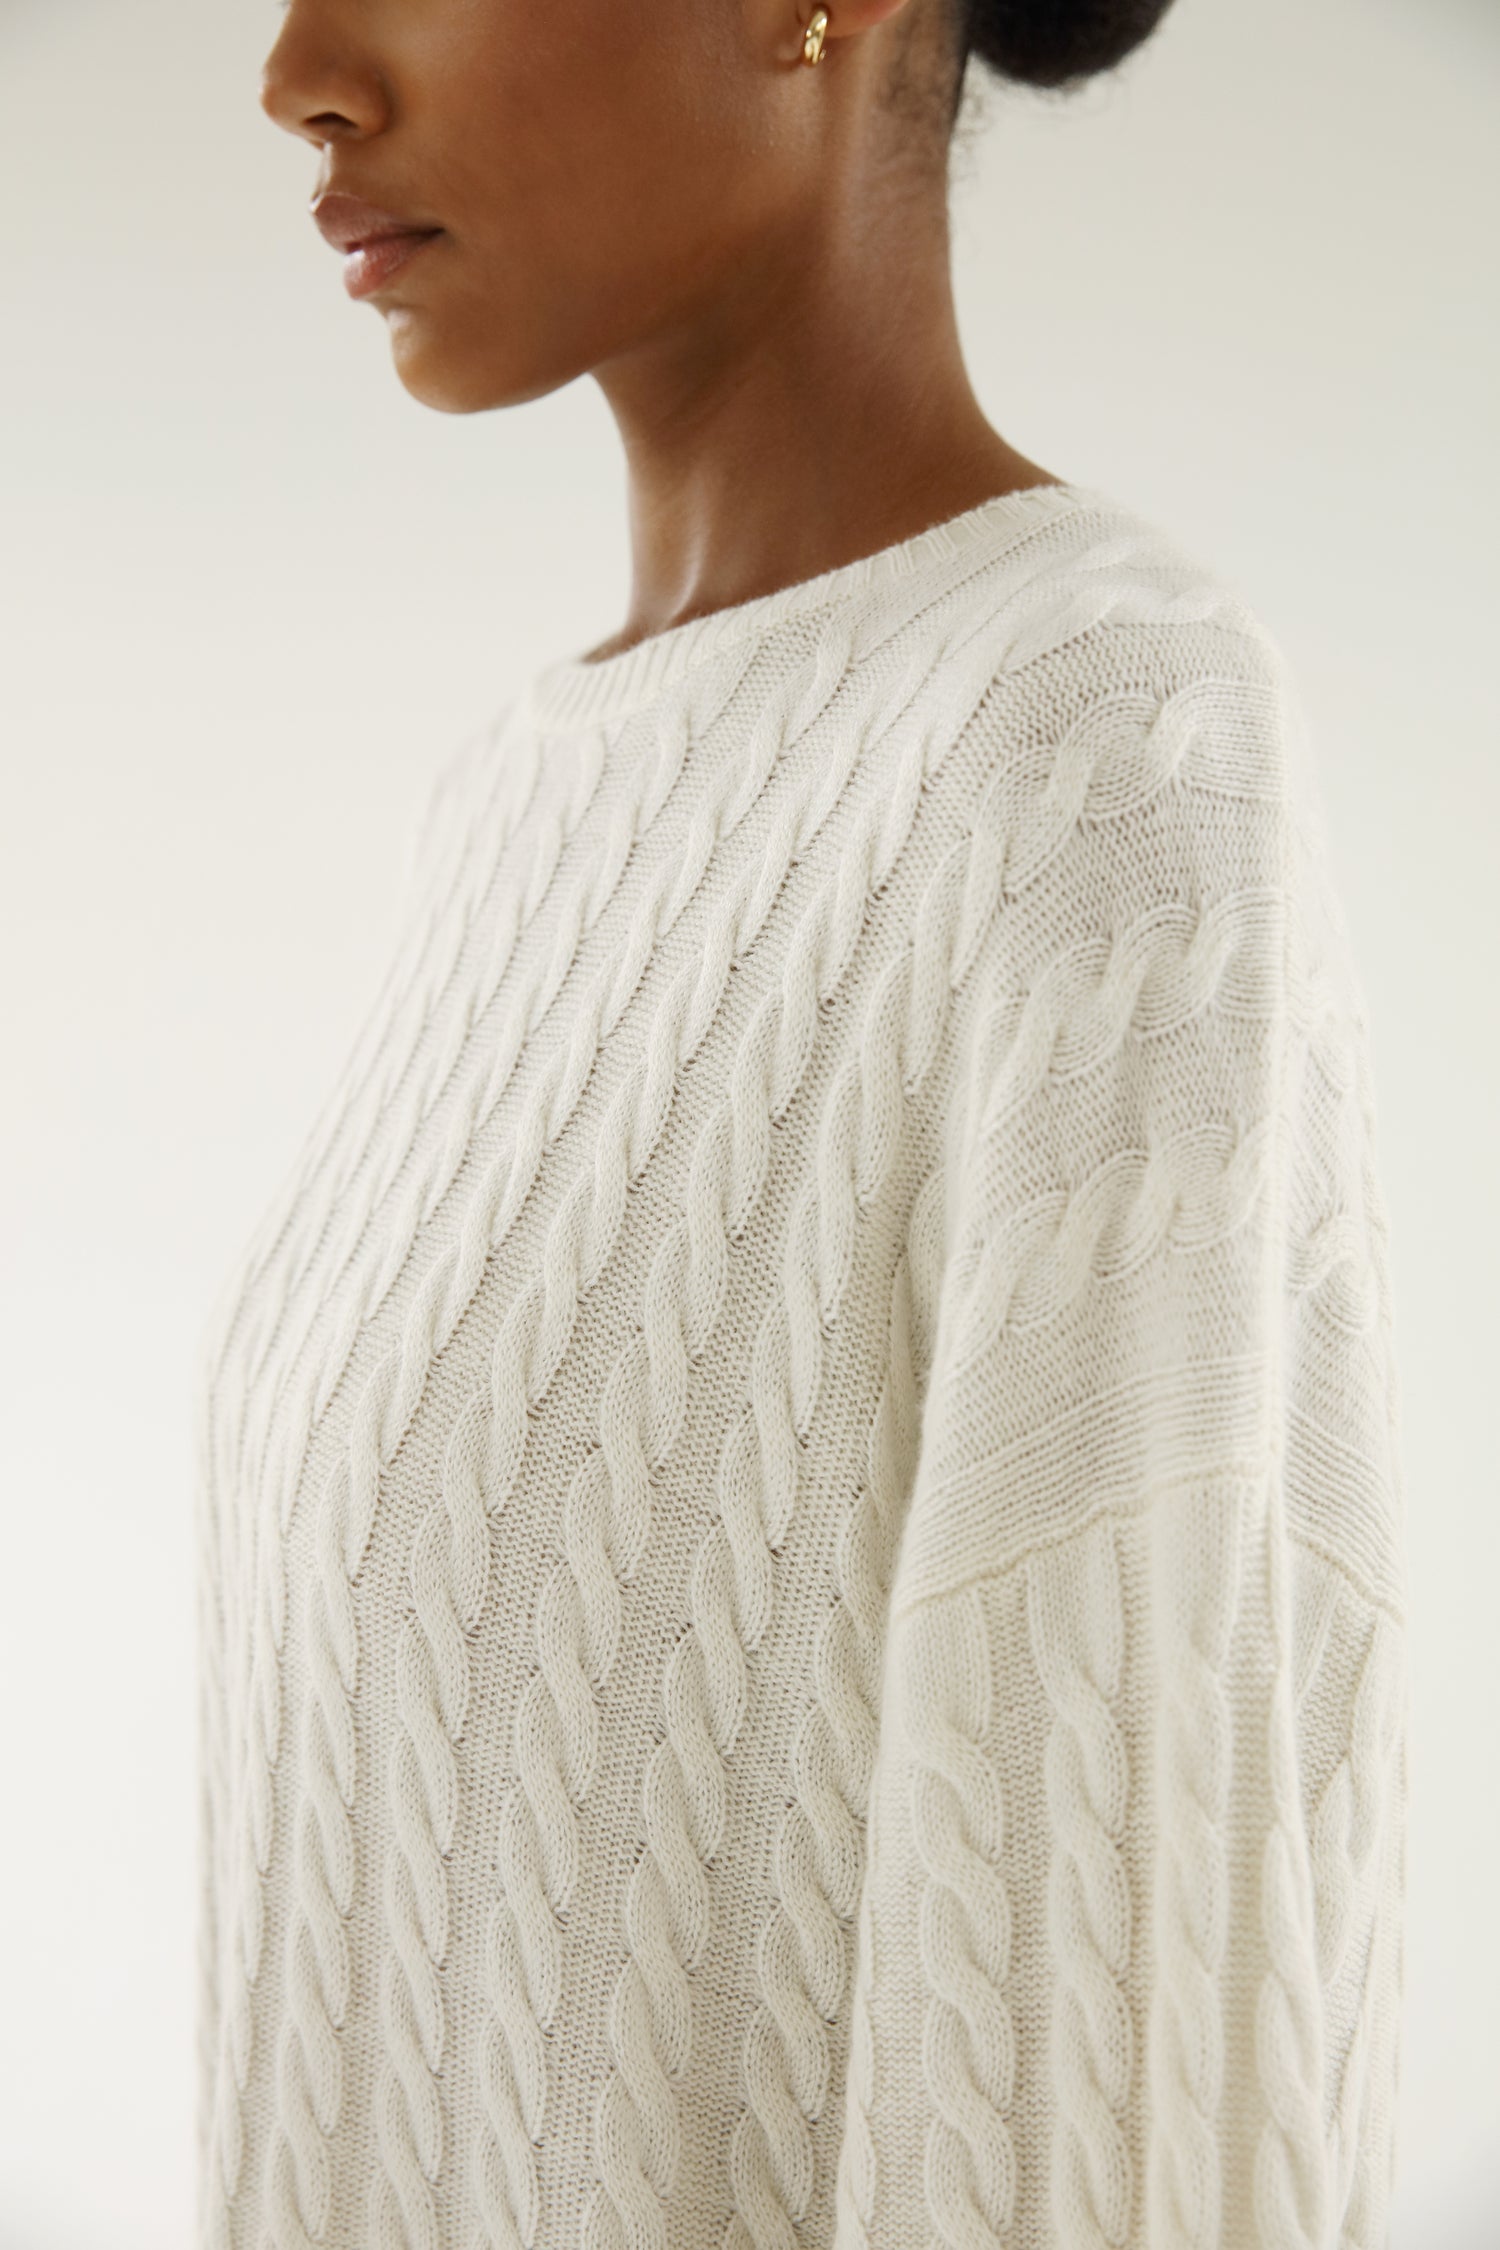 Noma Cable Knit Dress, cream